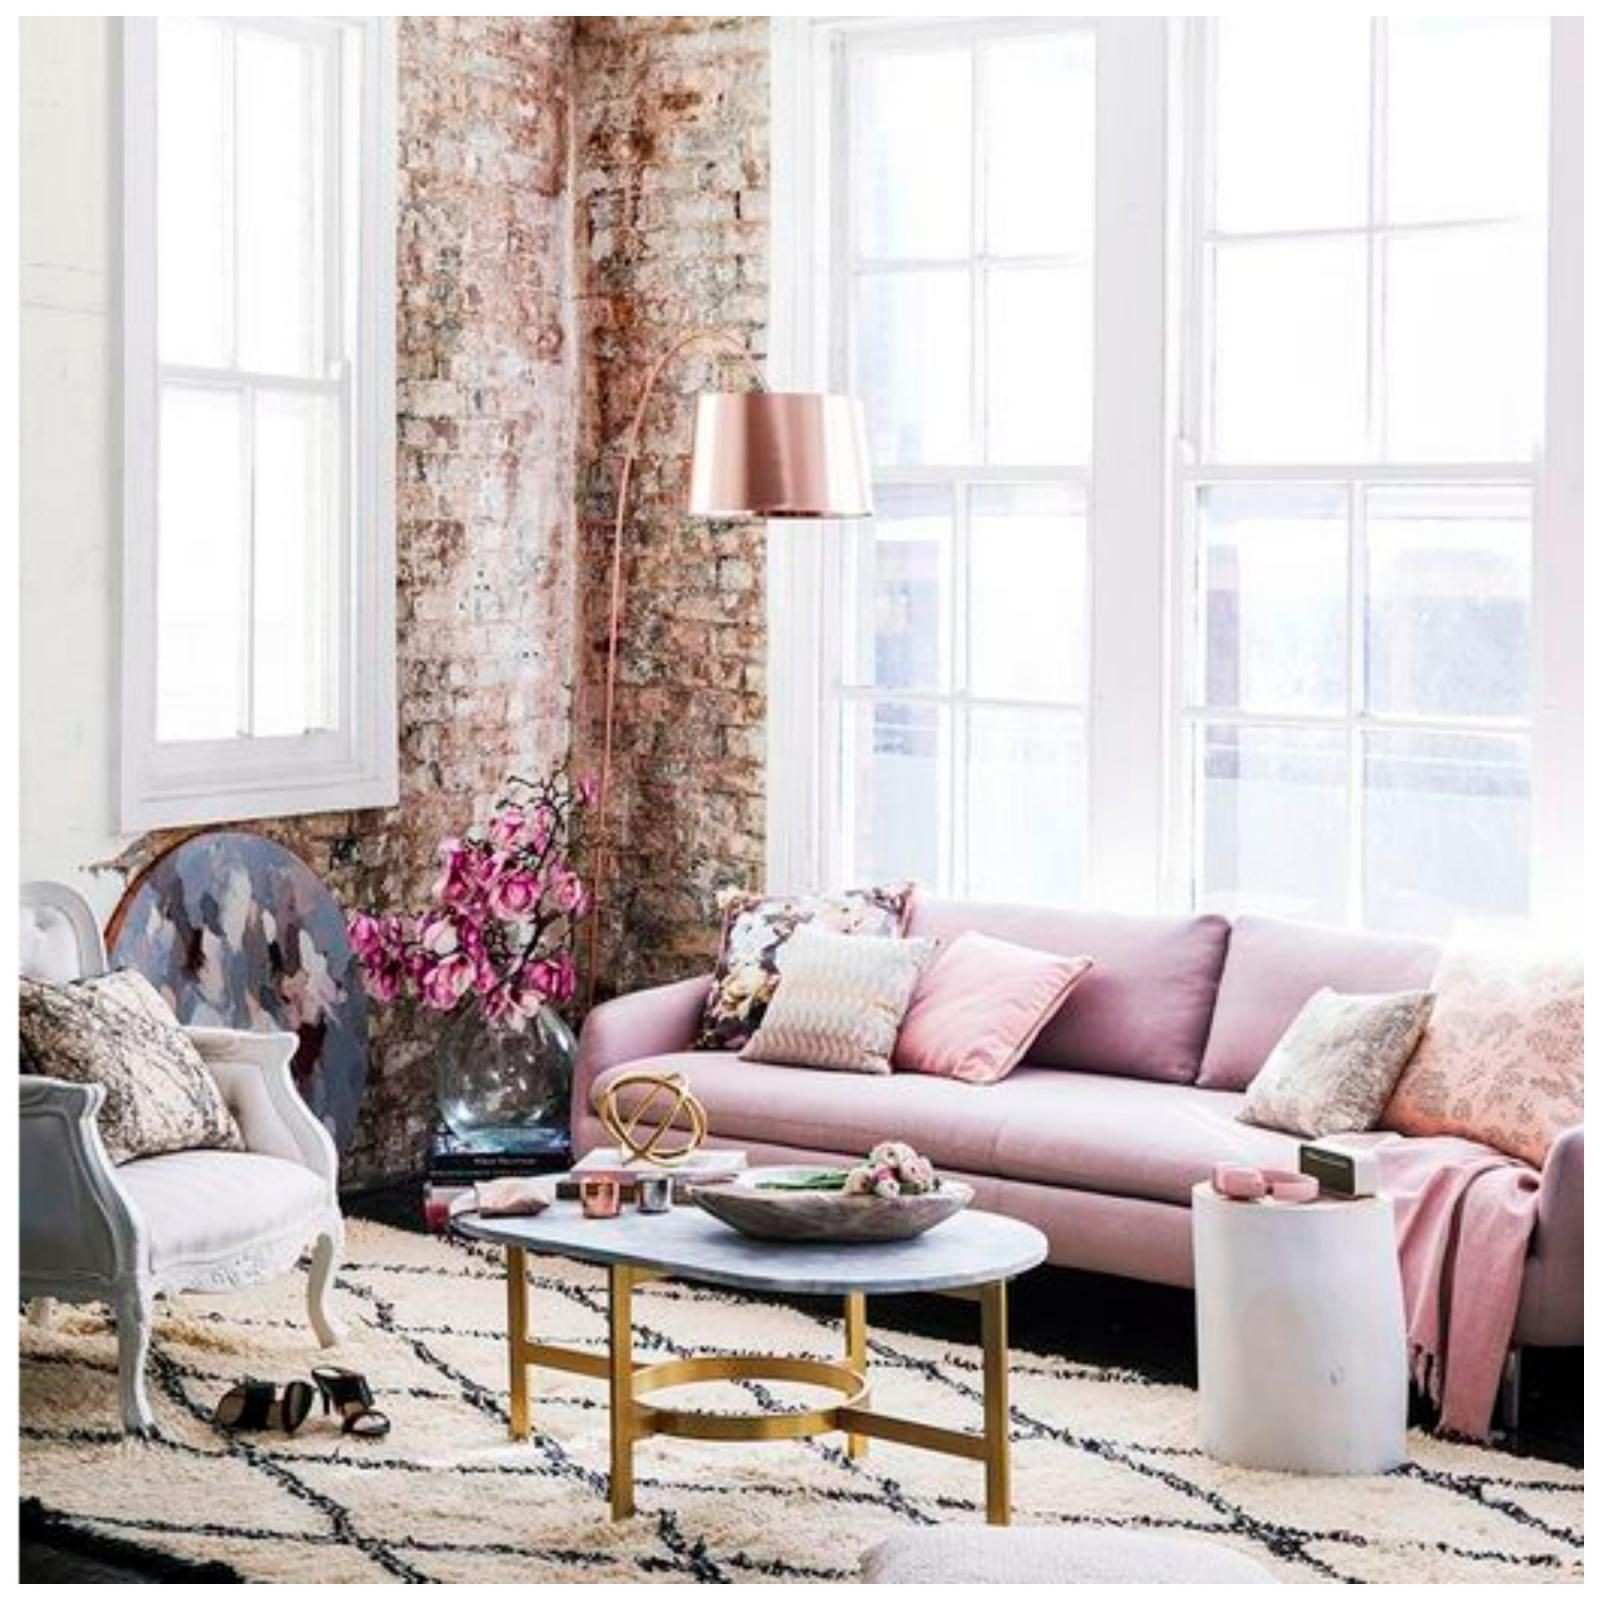 decorating ideas for feminine bedroom elegant ultimate interiors inspiration furniture decor living room accent table sets rustic nightstands narrow end tables miniature lamp